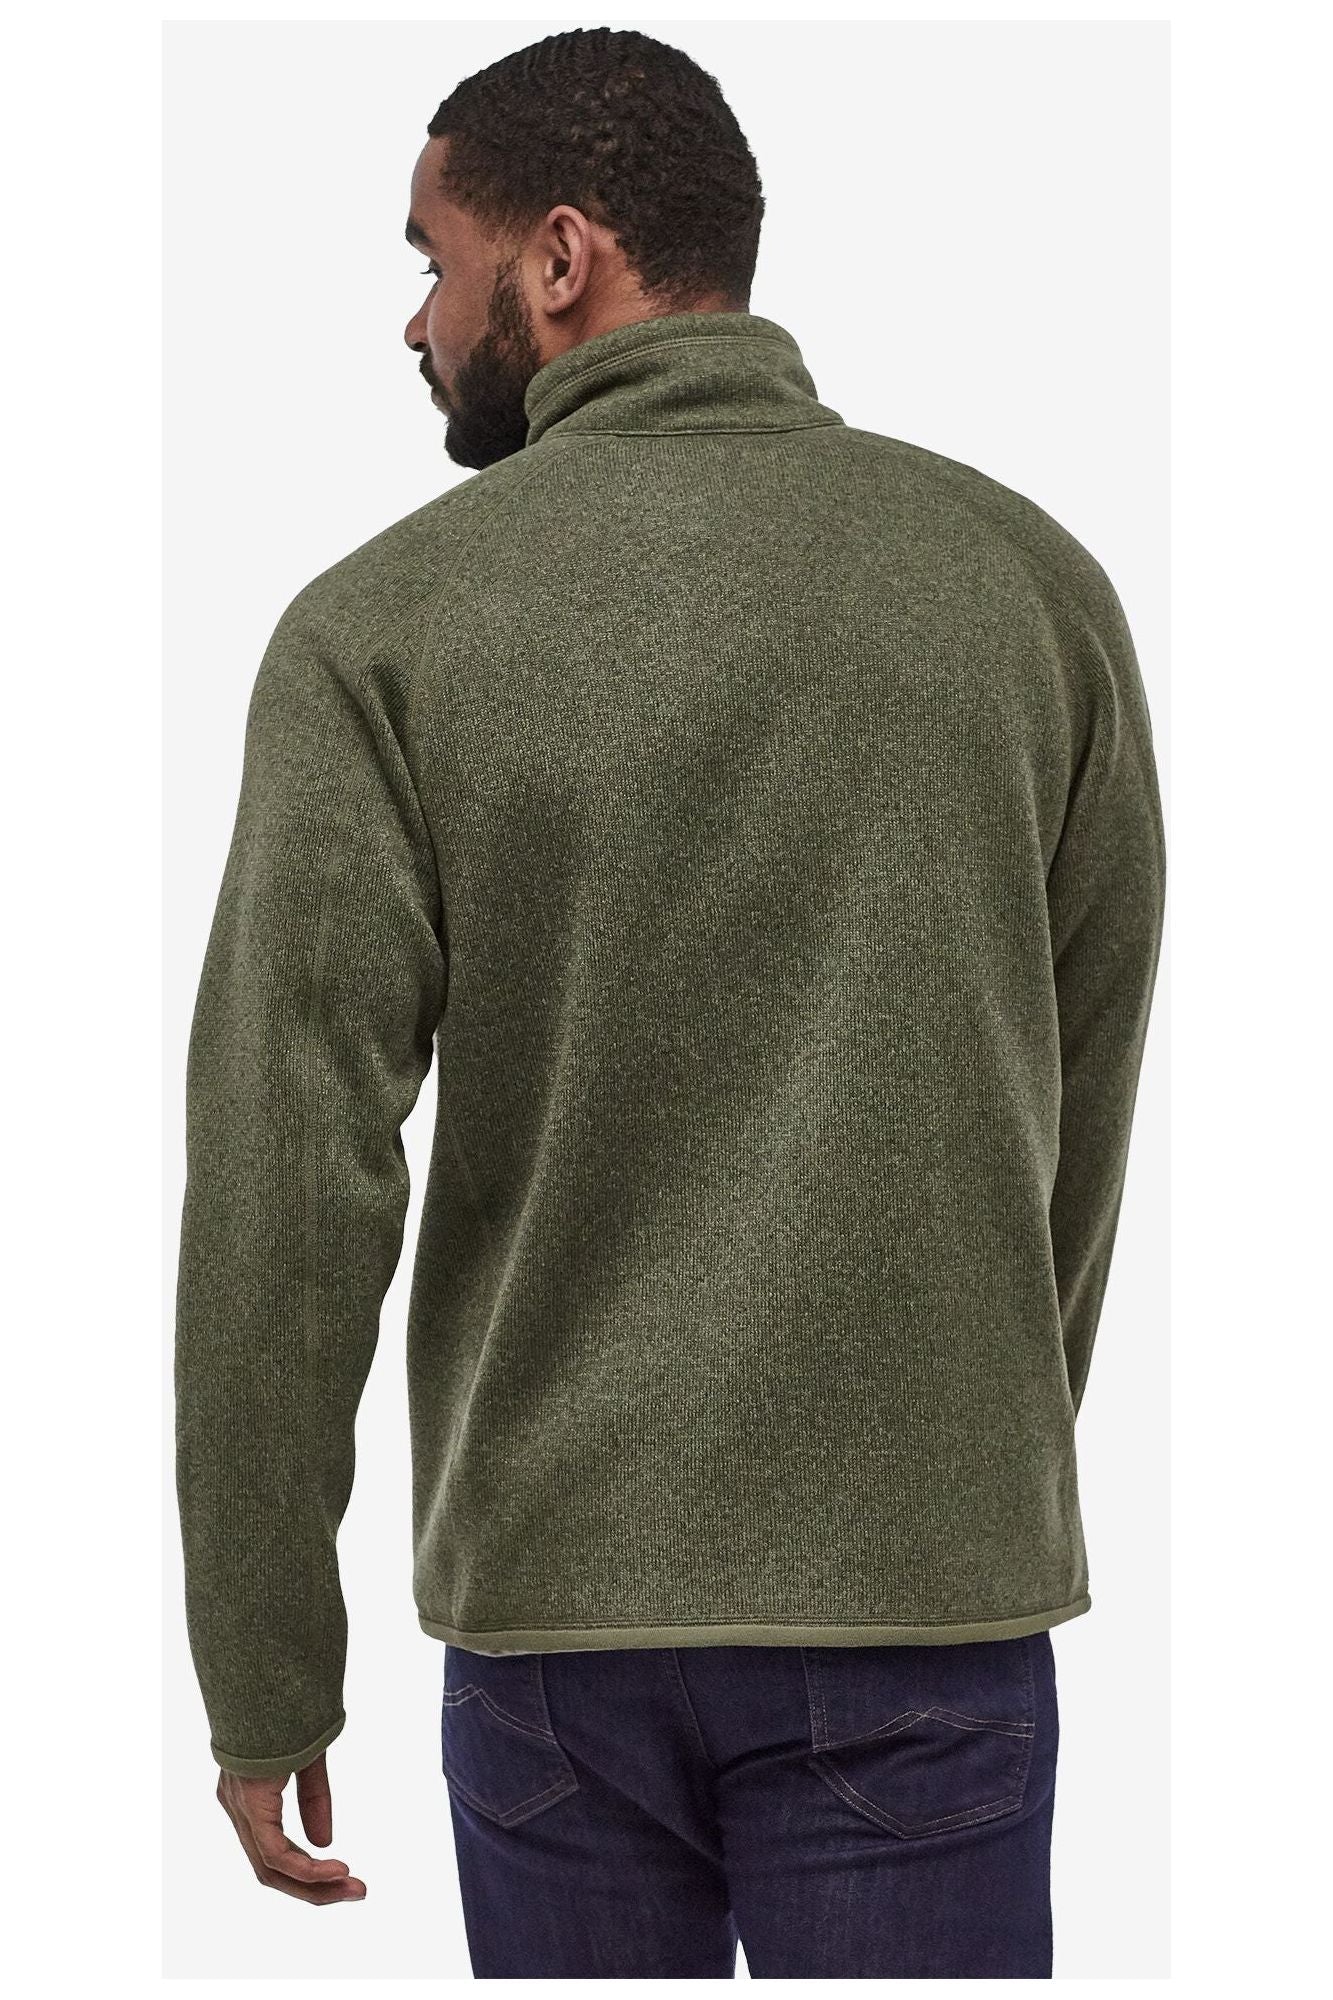 Patagonia Ms Better Sweater 1/4 Zip Industrial Green